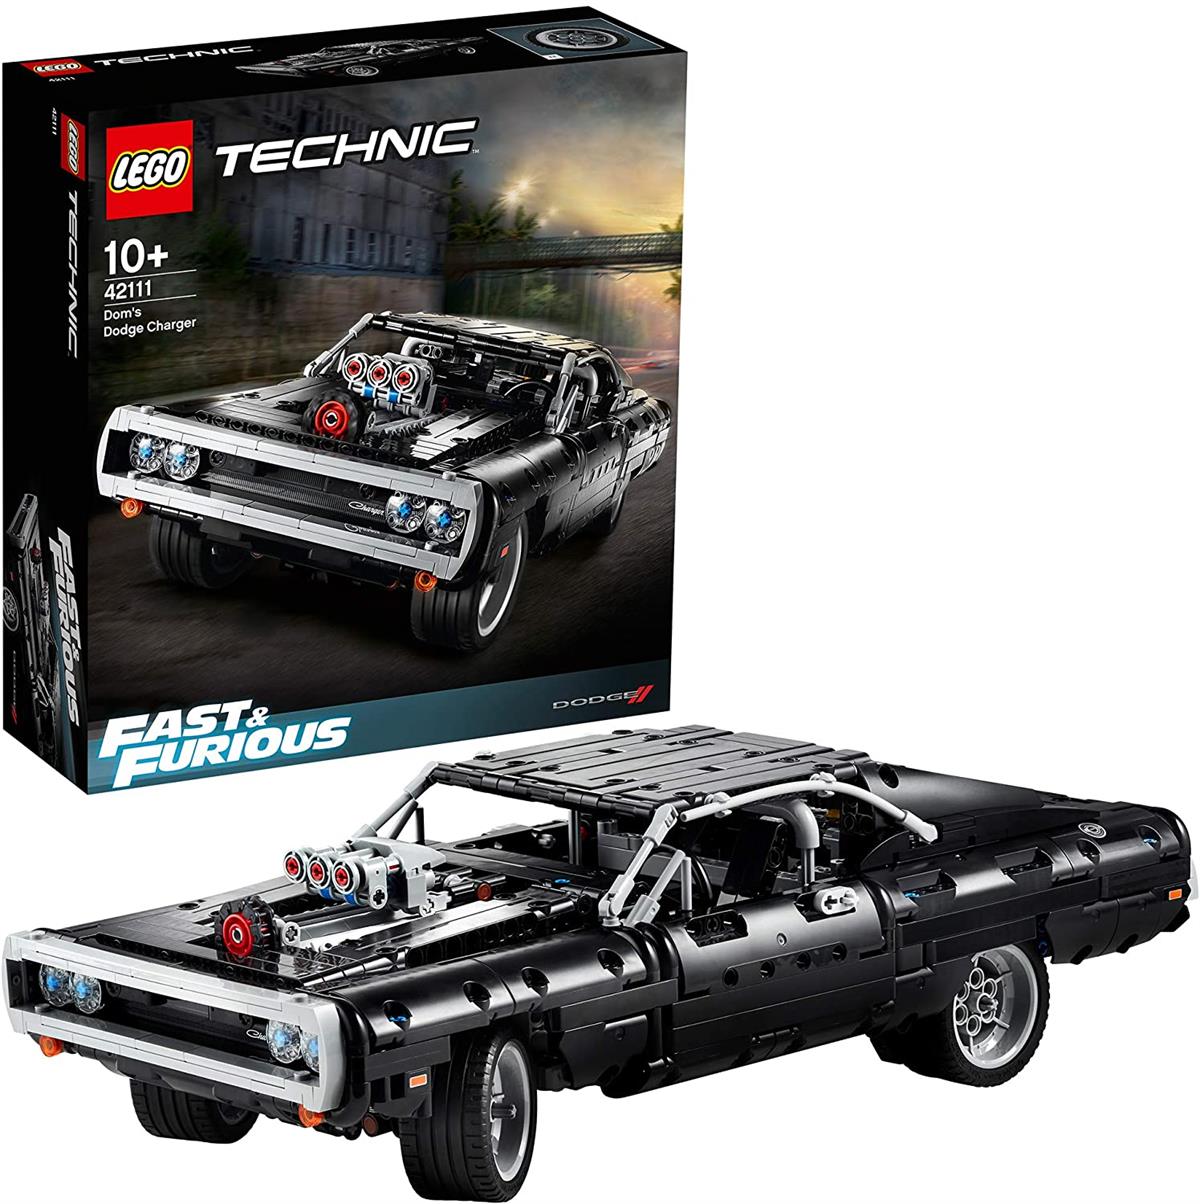 LEGO 42111 DOM'S DODGE CHARGER TECHNIC